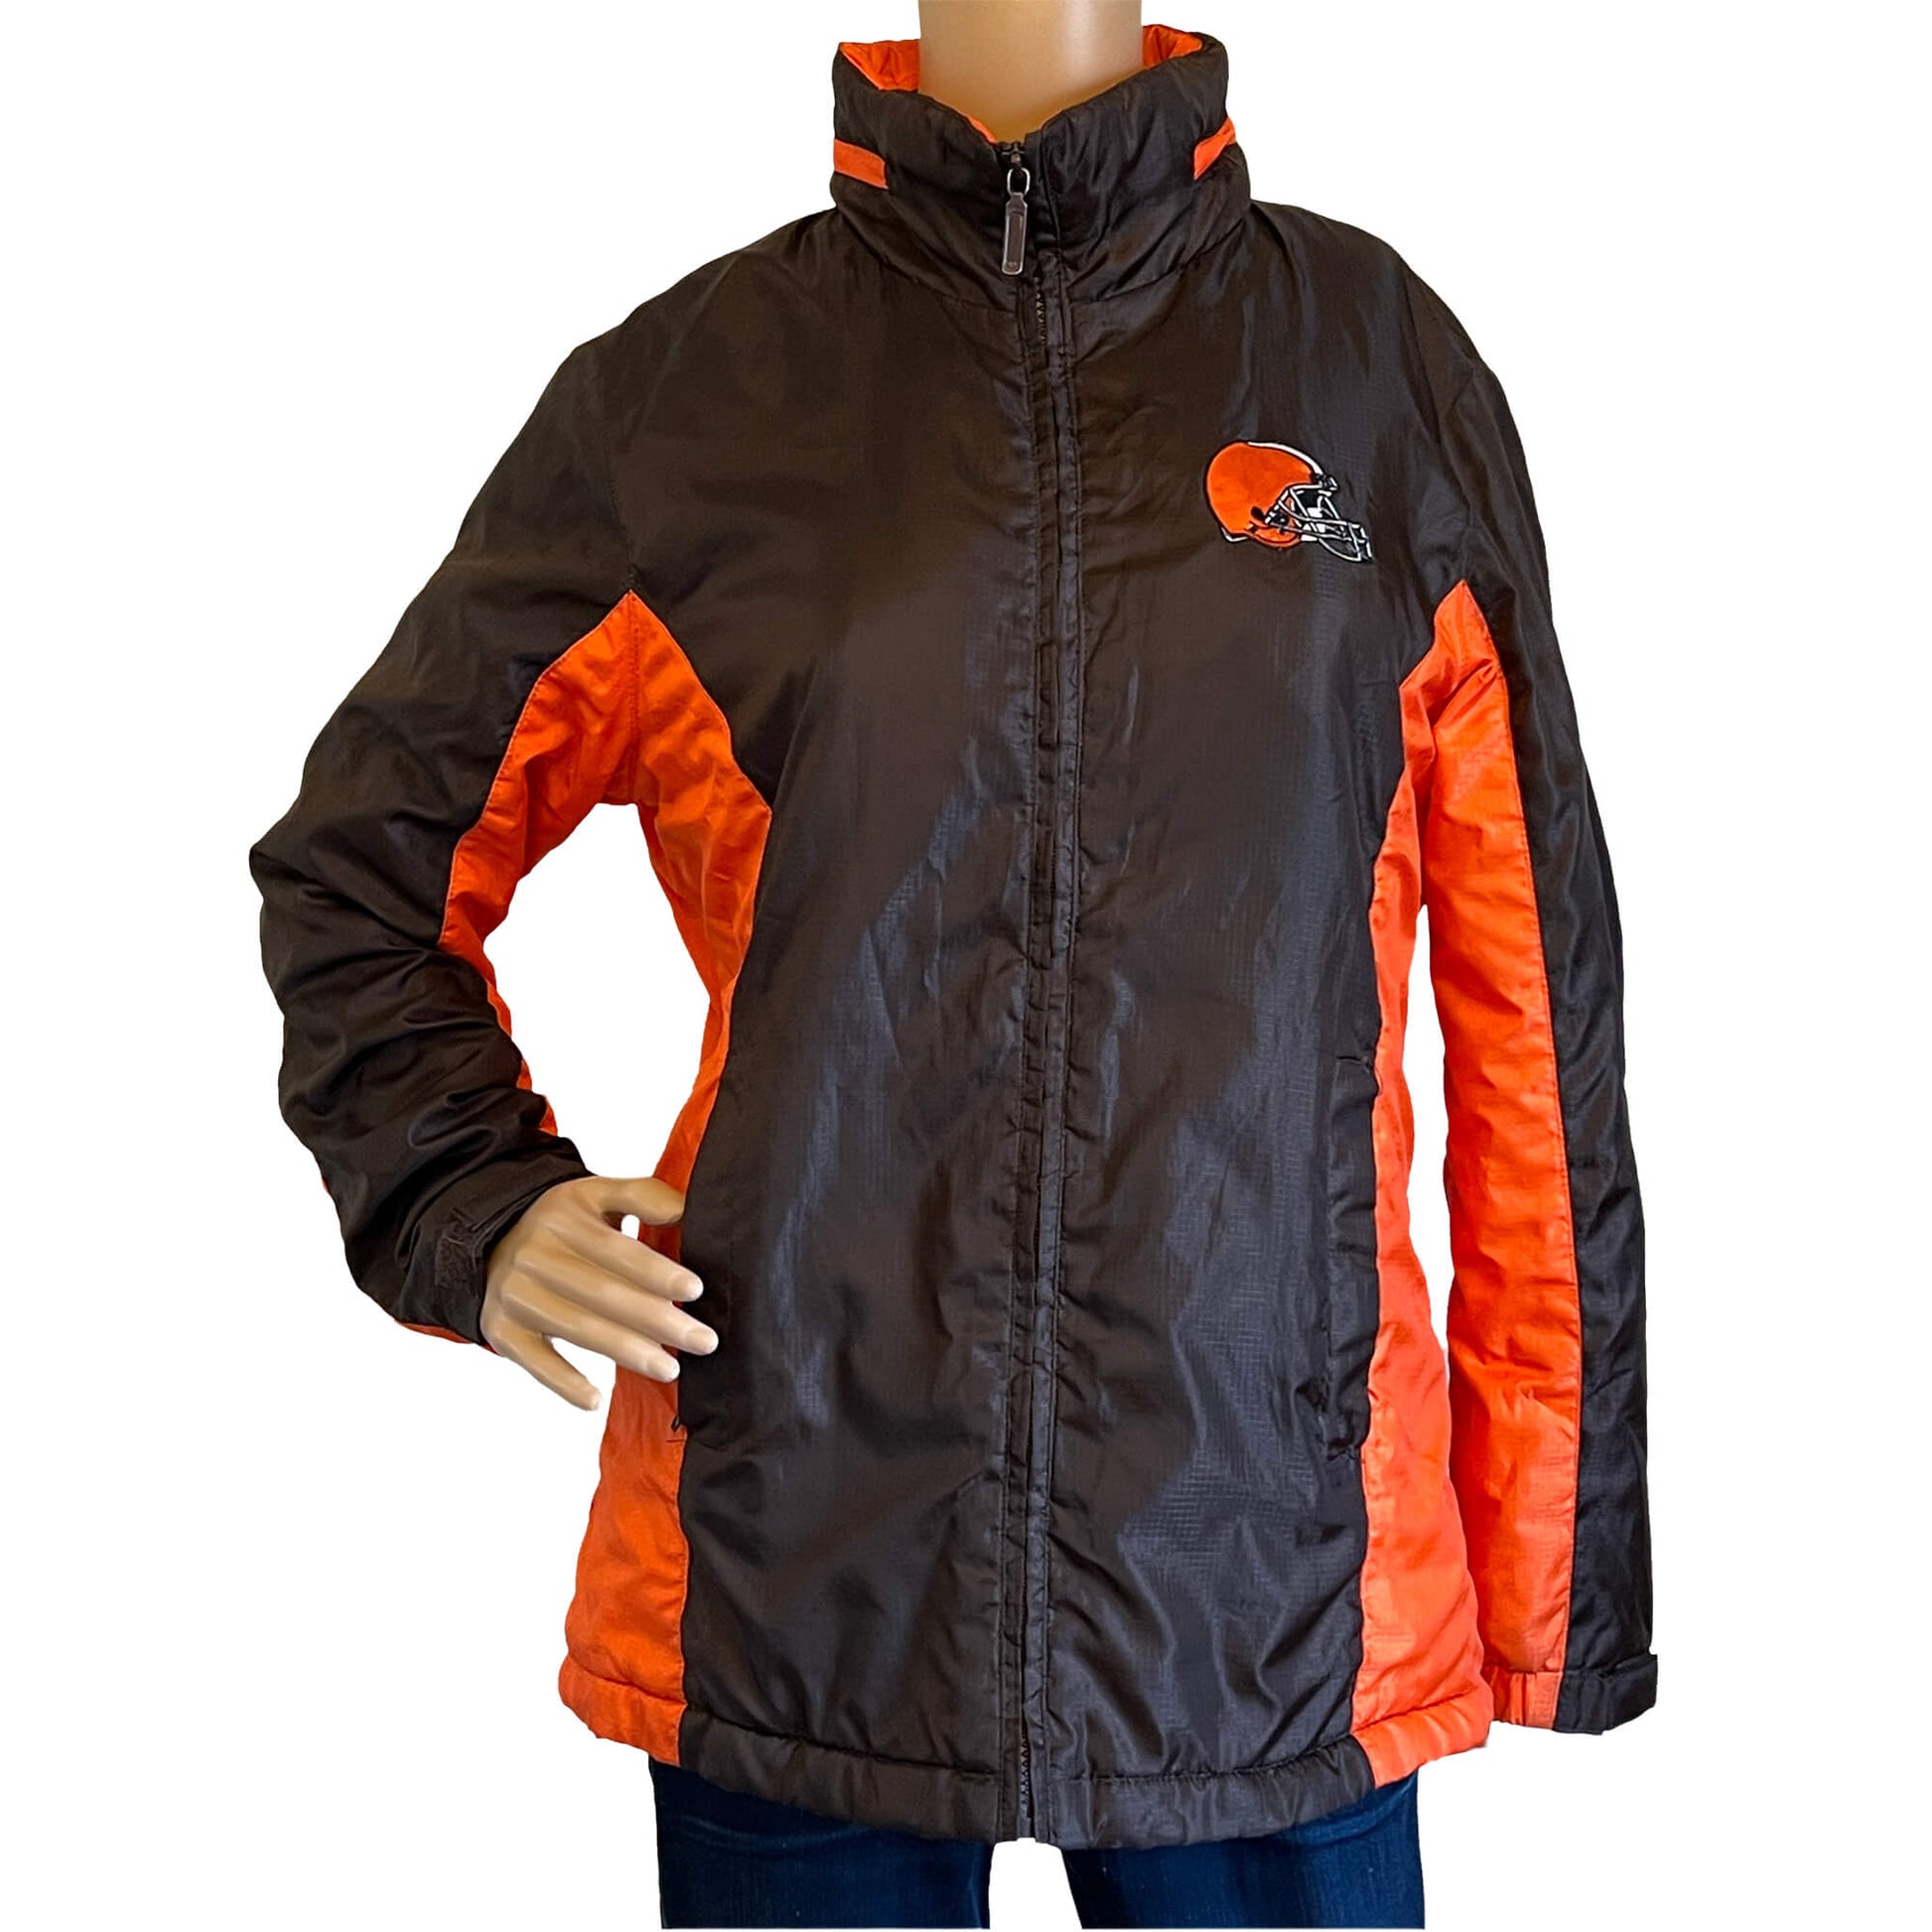 Cleveland-Browns-NFL-for-Her-Jacket-by-G-III-Apparel.-Front-view.-Shop-eBargainsAndDeals.com